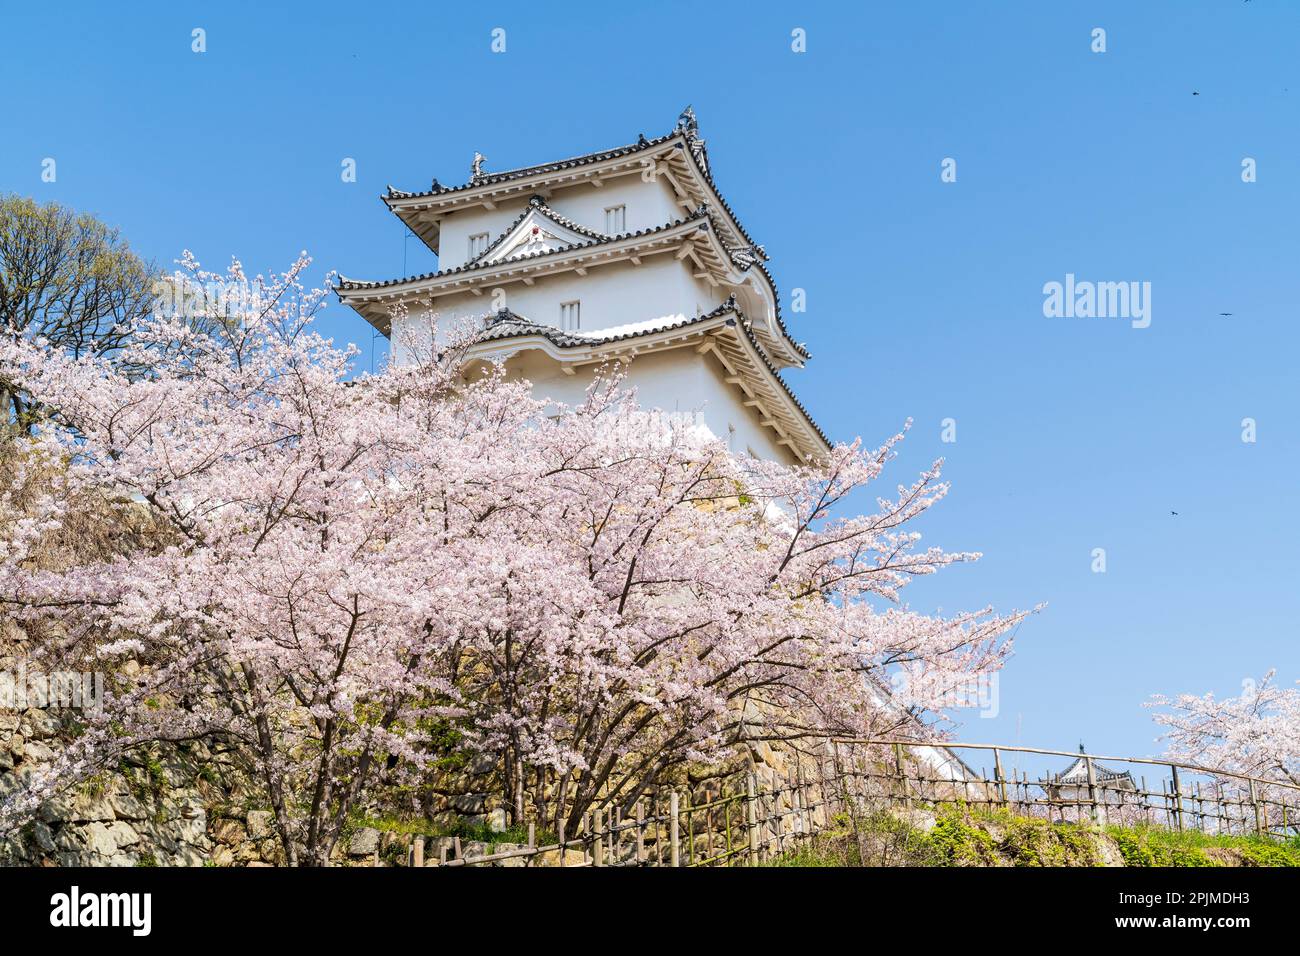 The Hitsujisaru yagura, turret, at Akashi castle rising above cherry blossoms in full bloom lit by bright sunshine with a clear blue sky background. Stock Photo